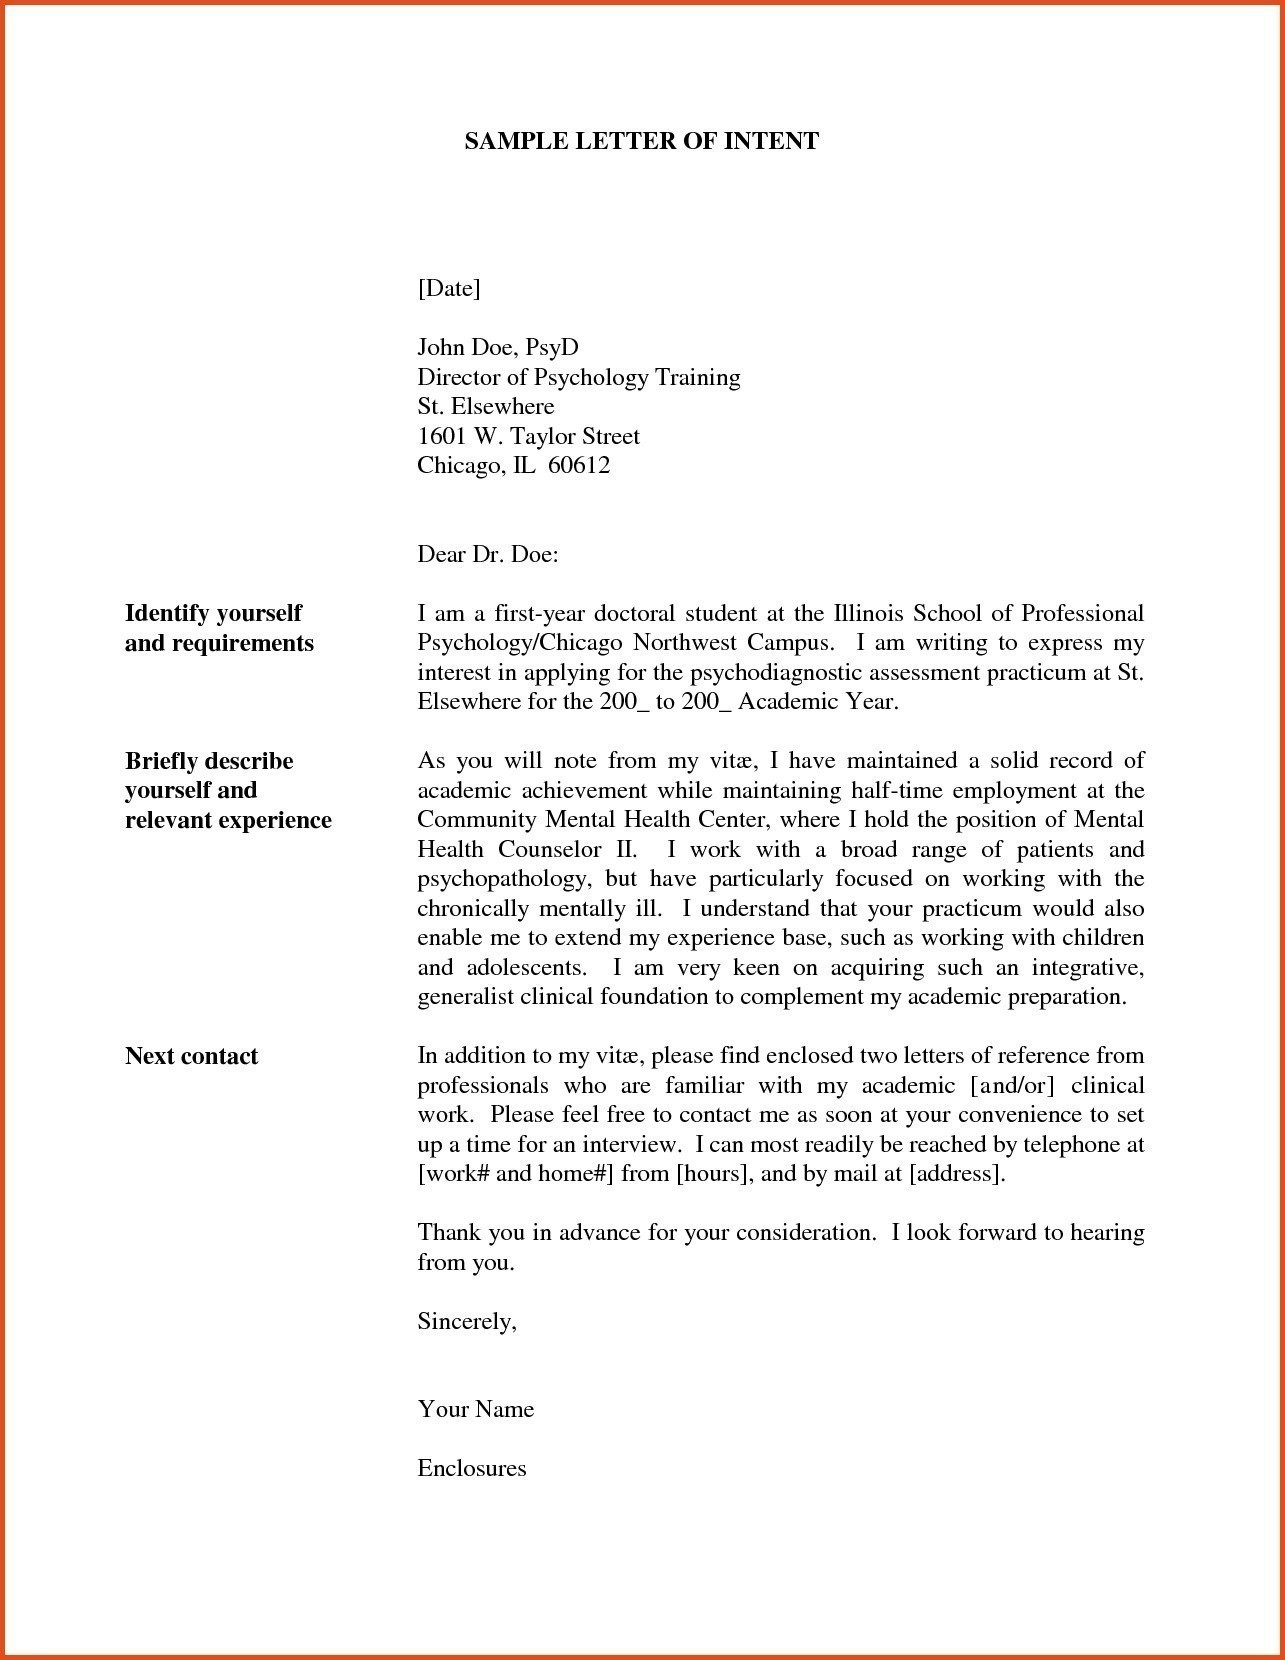 Template Letter Of Intent Sample Letter Intent for Job Philippines